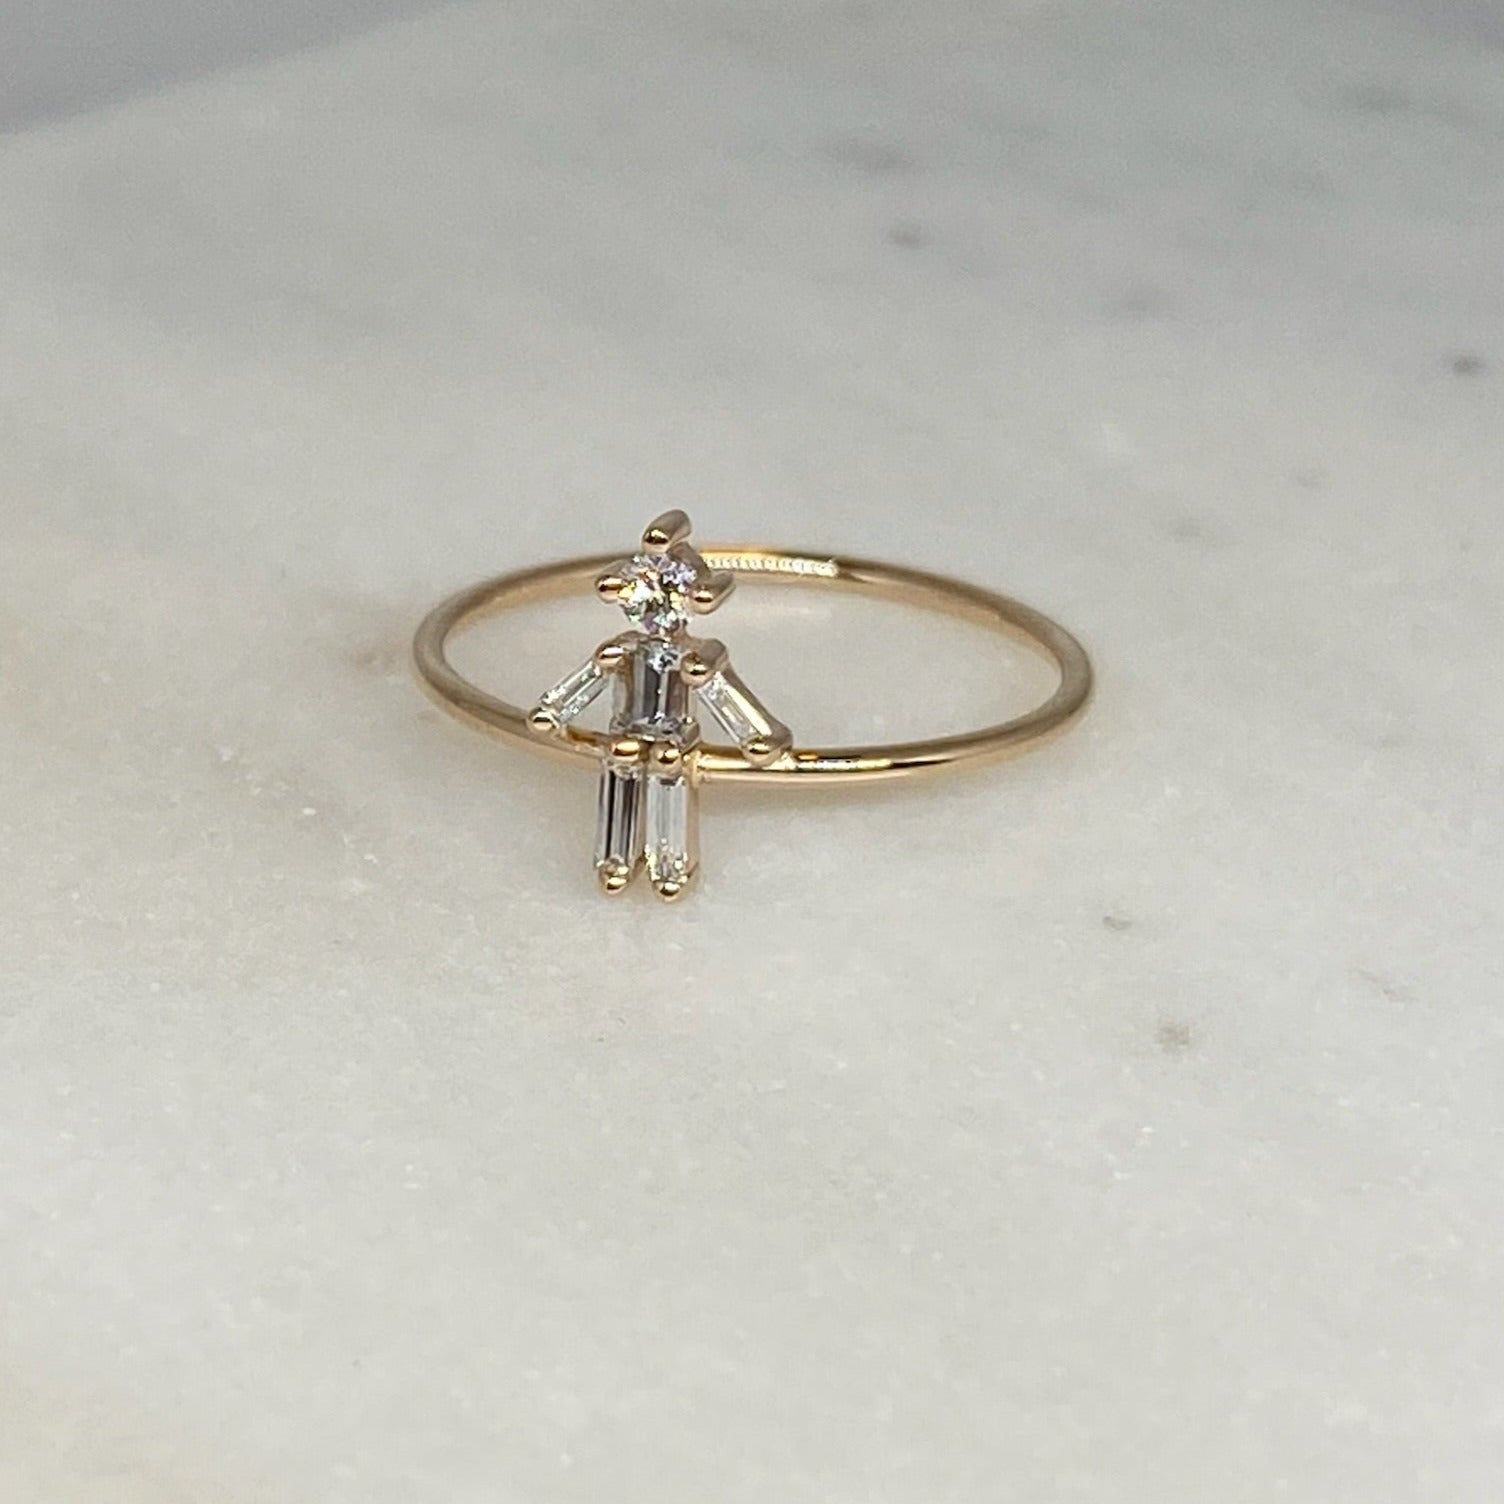 Diamonds and 18Kt yellow / rose / white gold boy ring